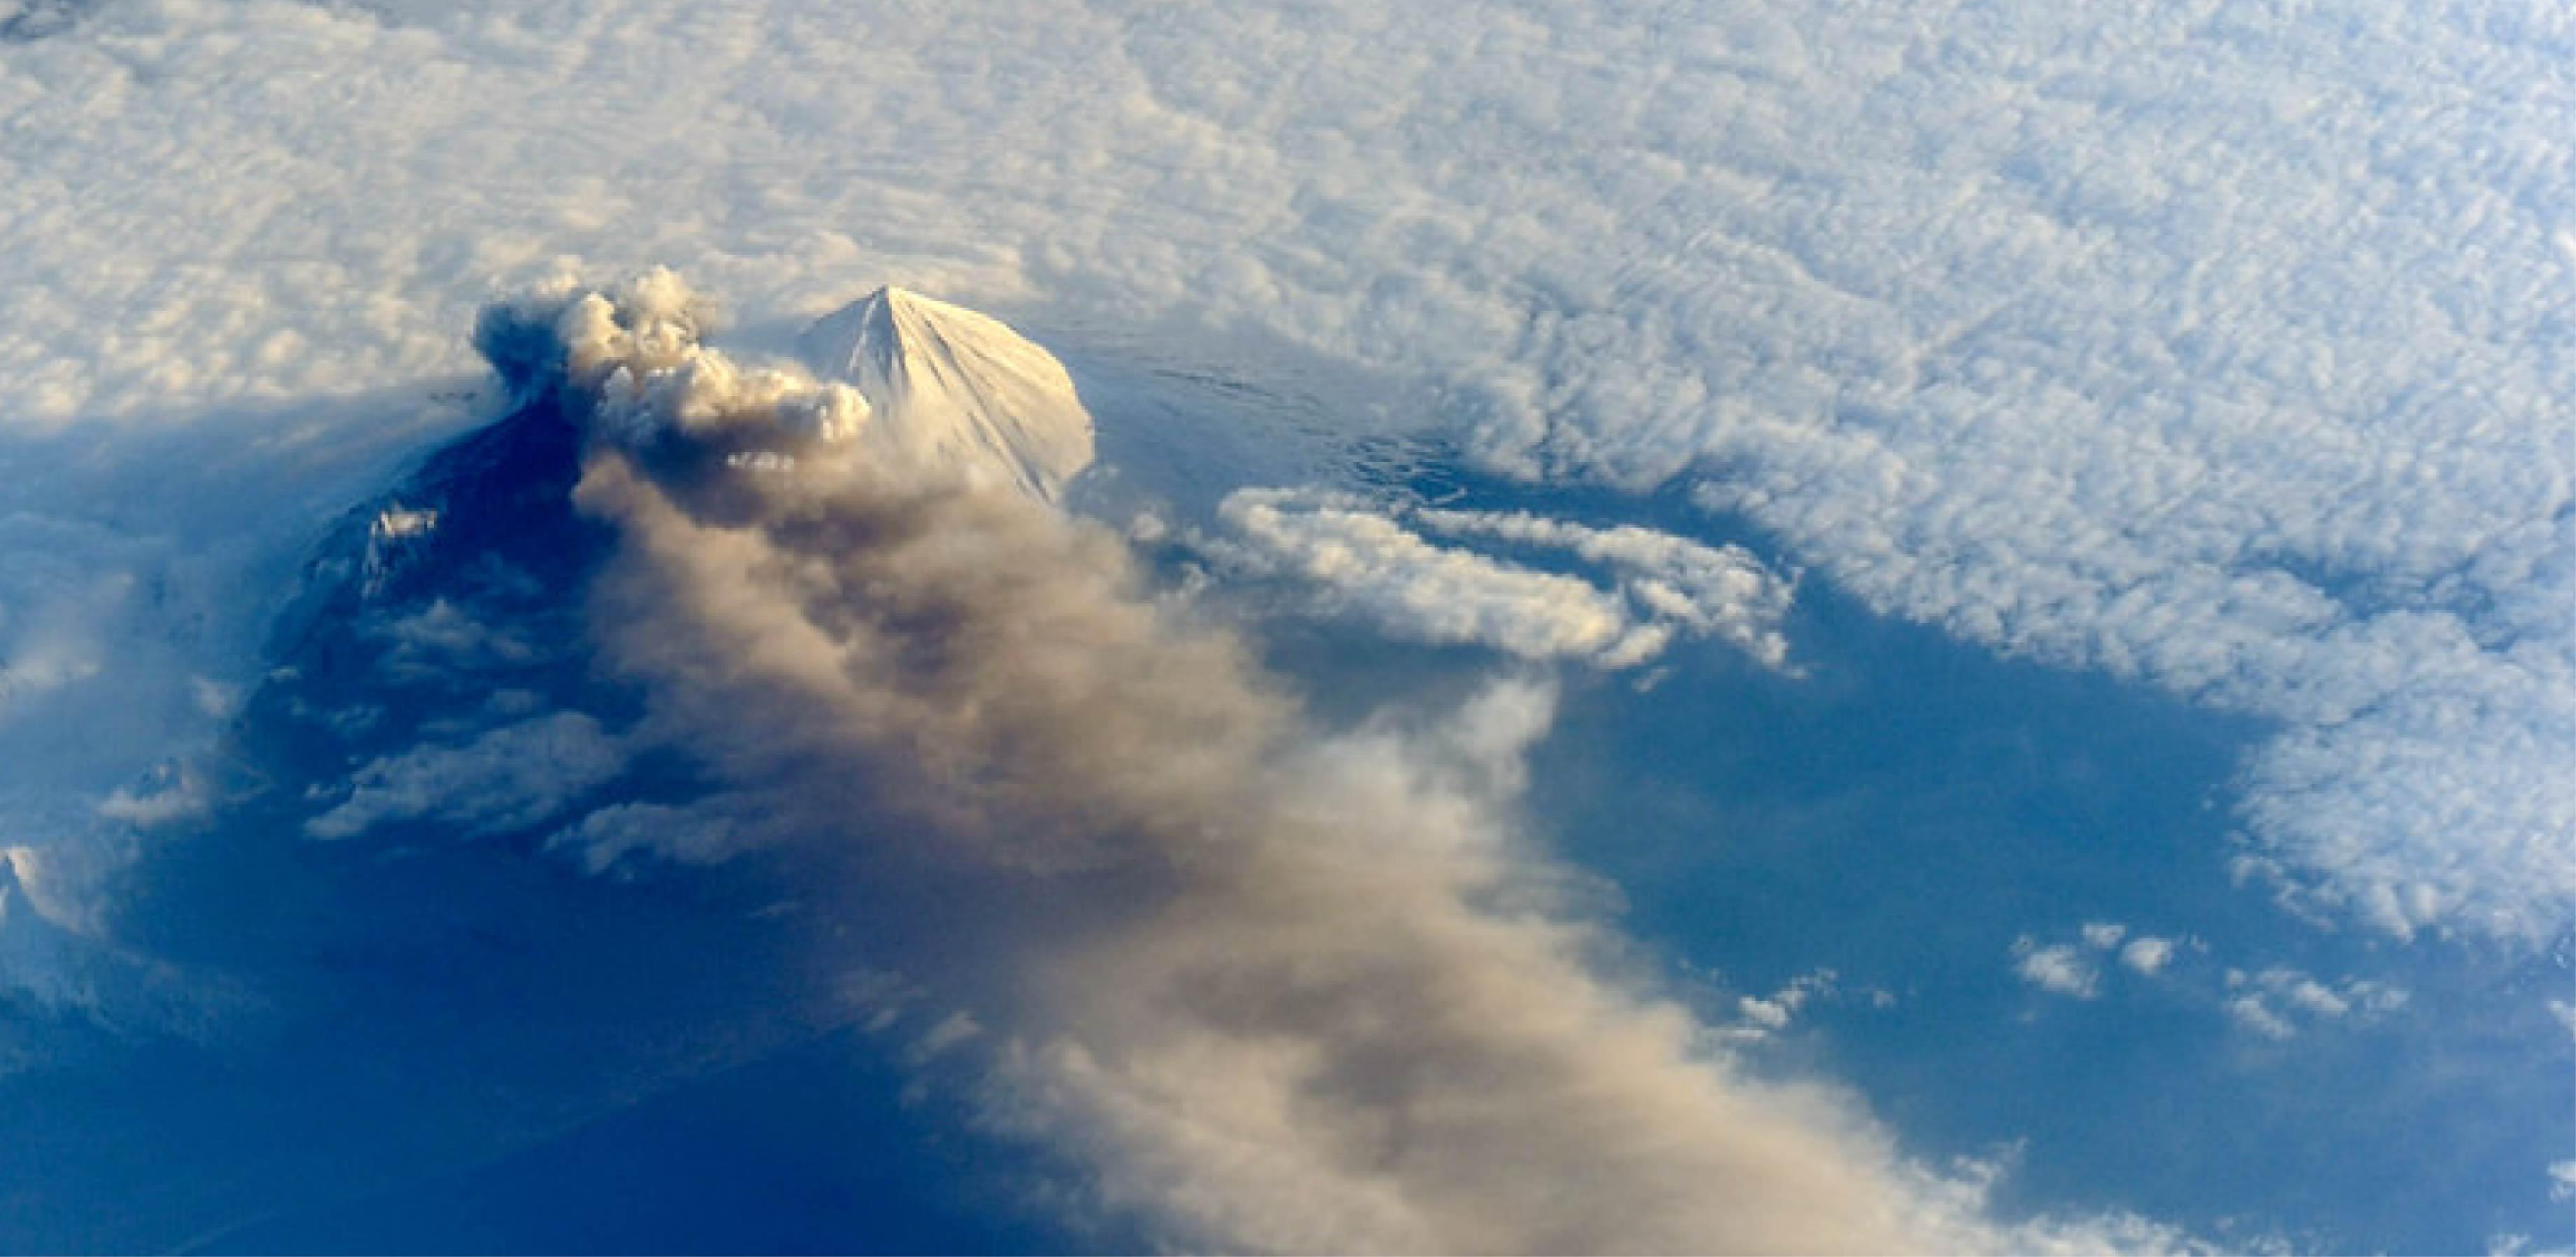 Satellite image of a volcano from space, shrouded in clouds and spewing volcanic ash